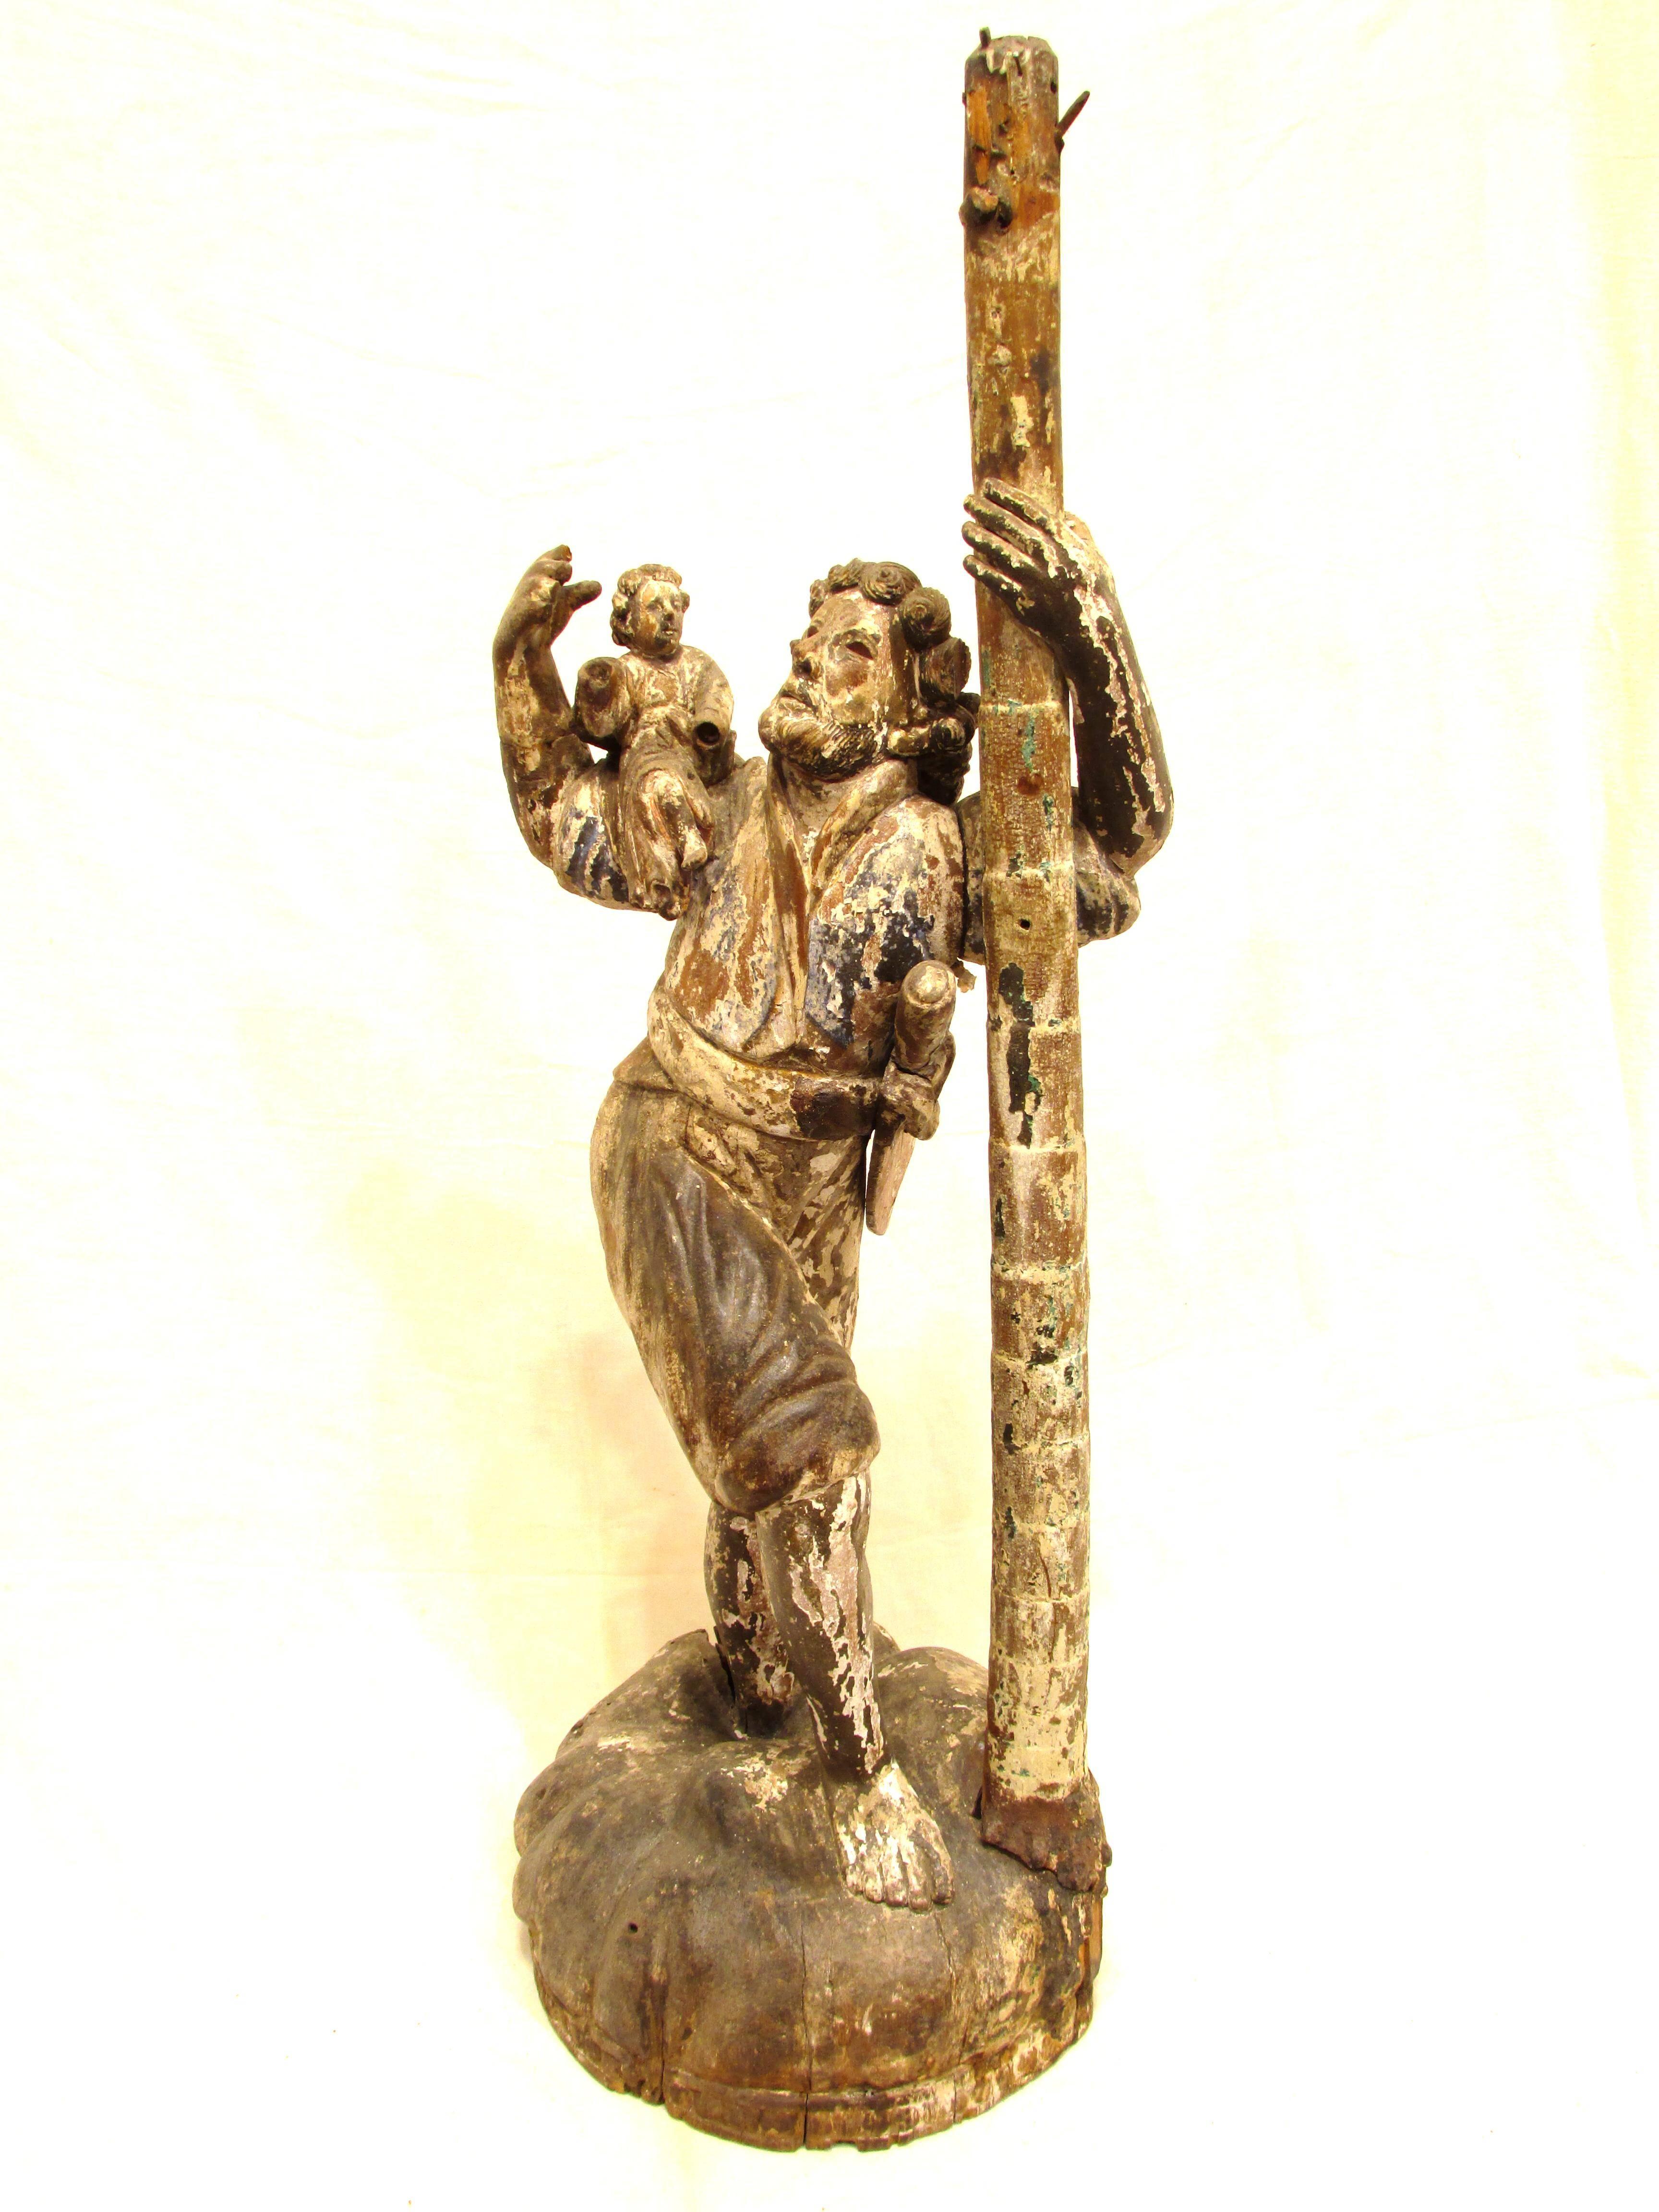 Antique and weathered carved wooden Santo of St. Christopher carrying the Christ child through water with tree for support in Conquistador attire.